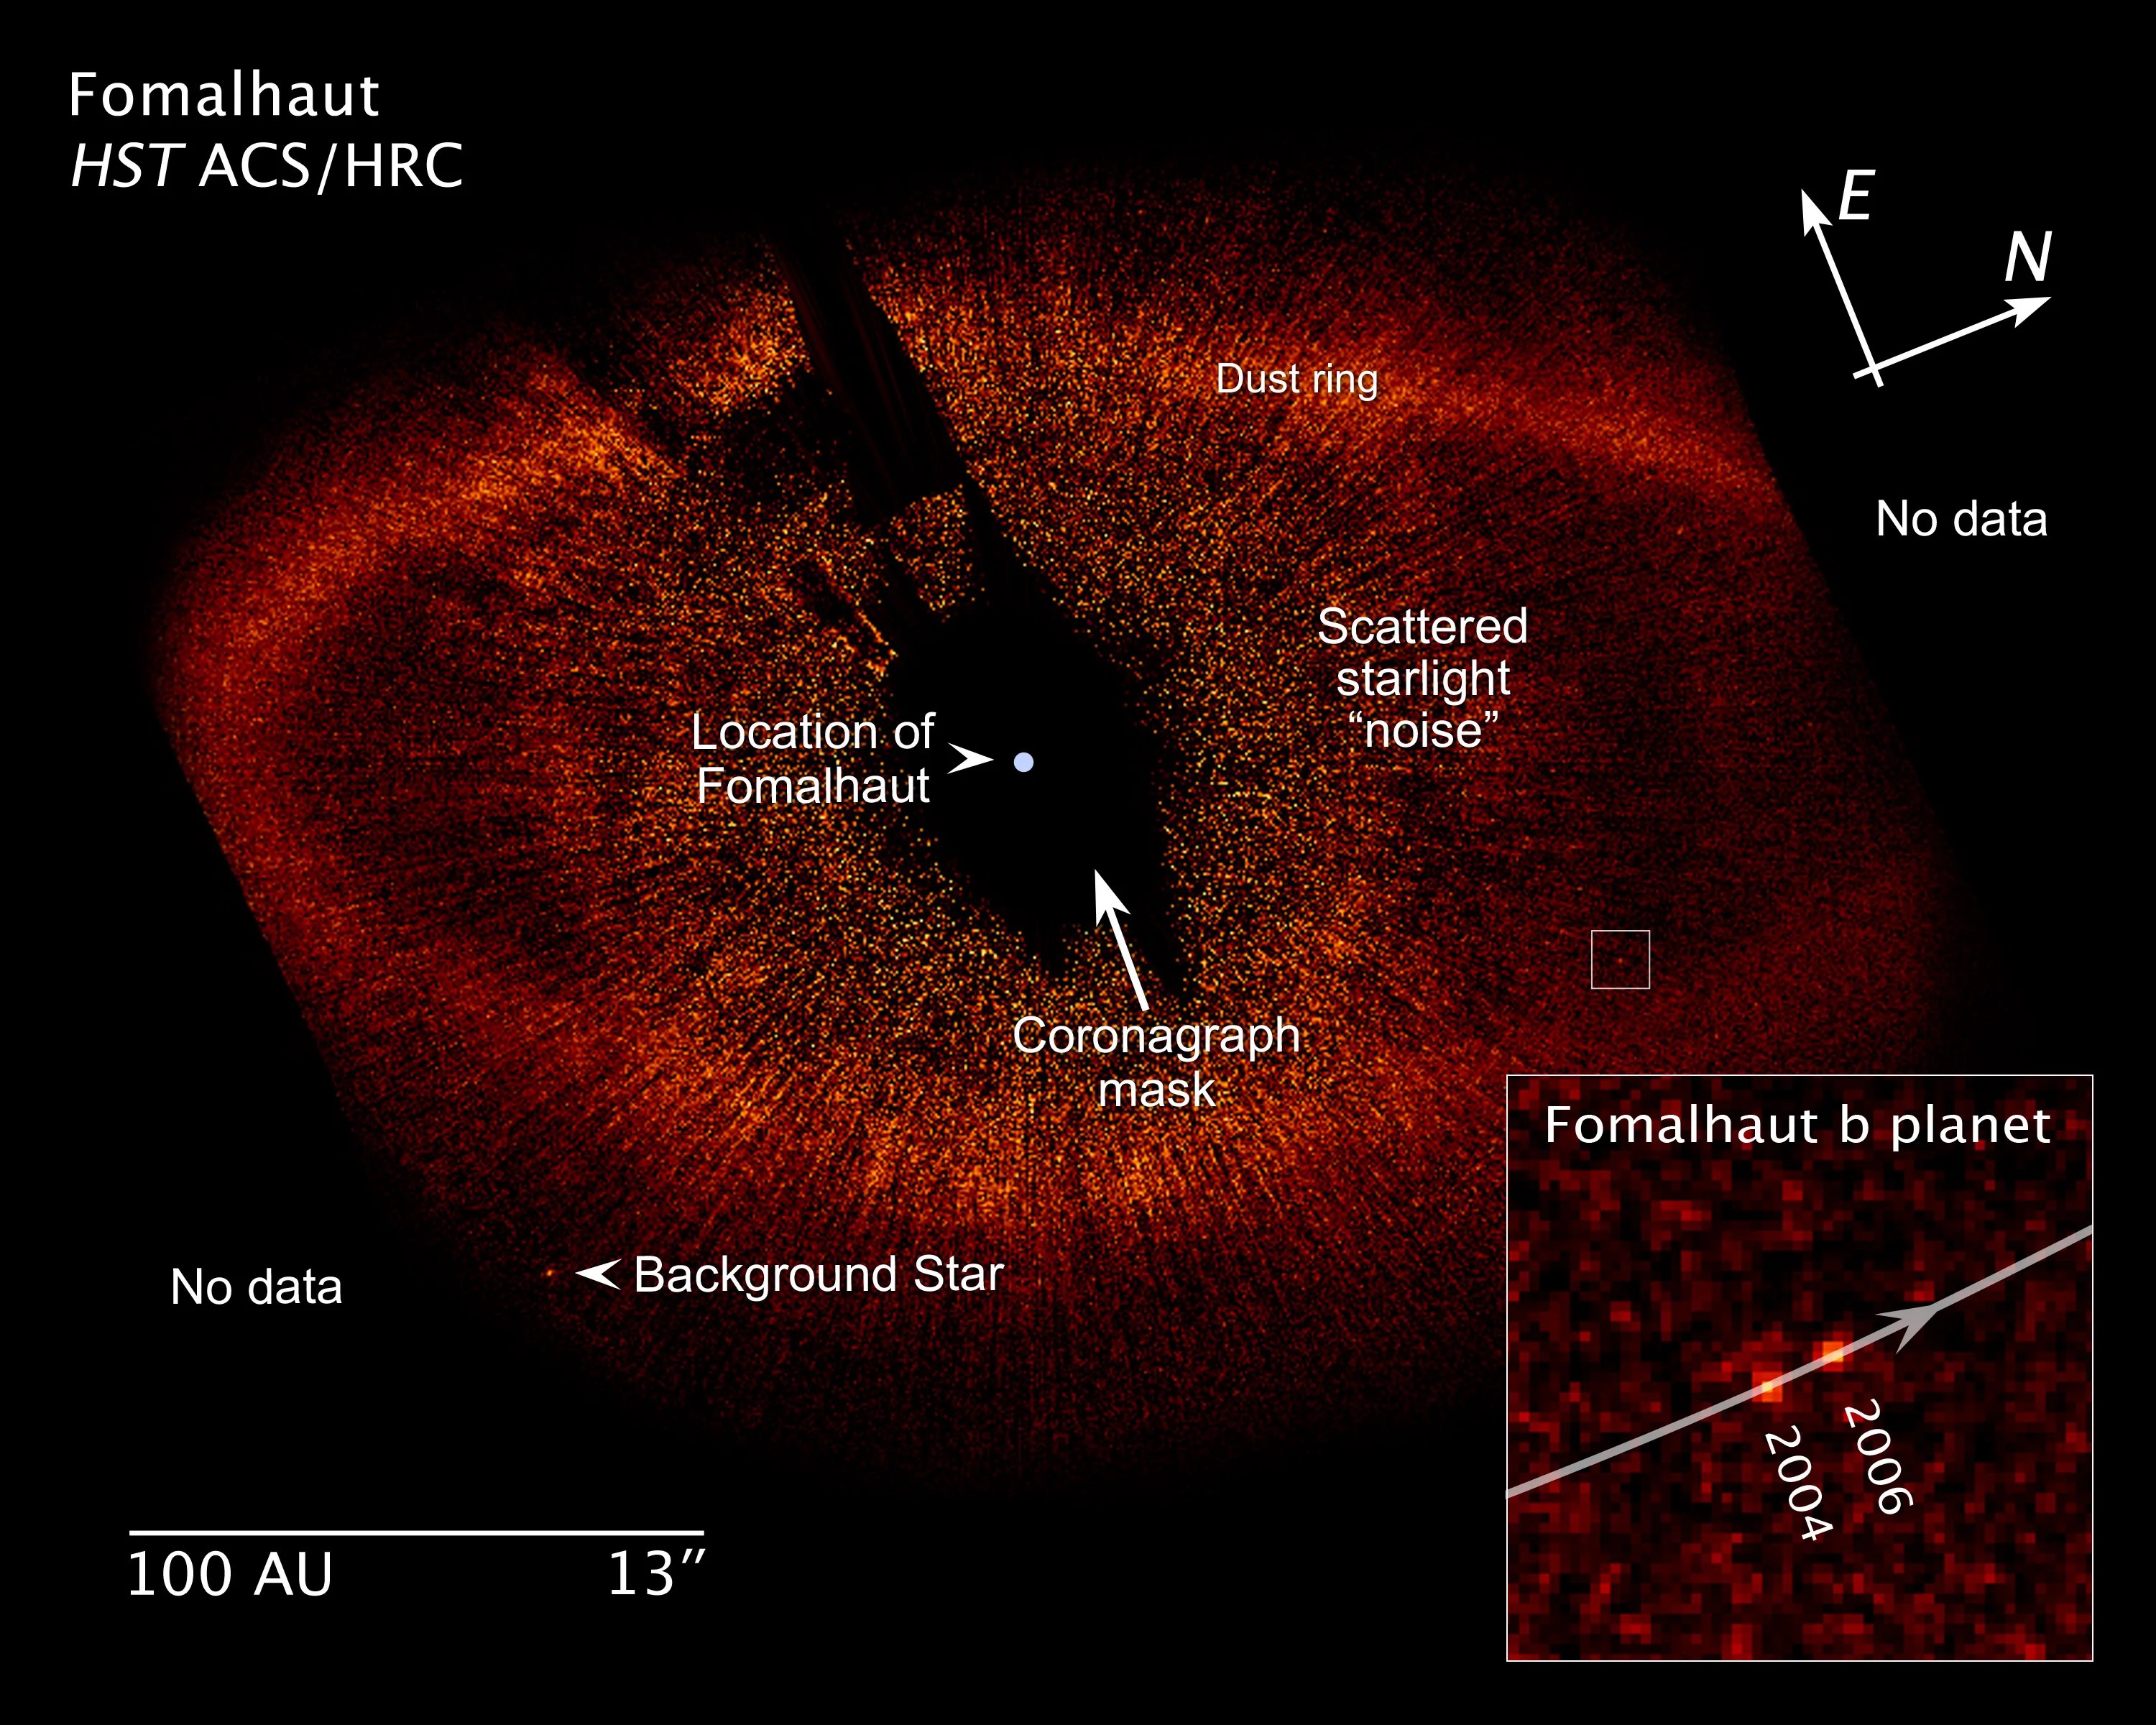 This visible-light image from the hubble shows the newly discovered planet, fomalhaut b, orbiting its parent star.